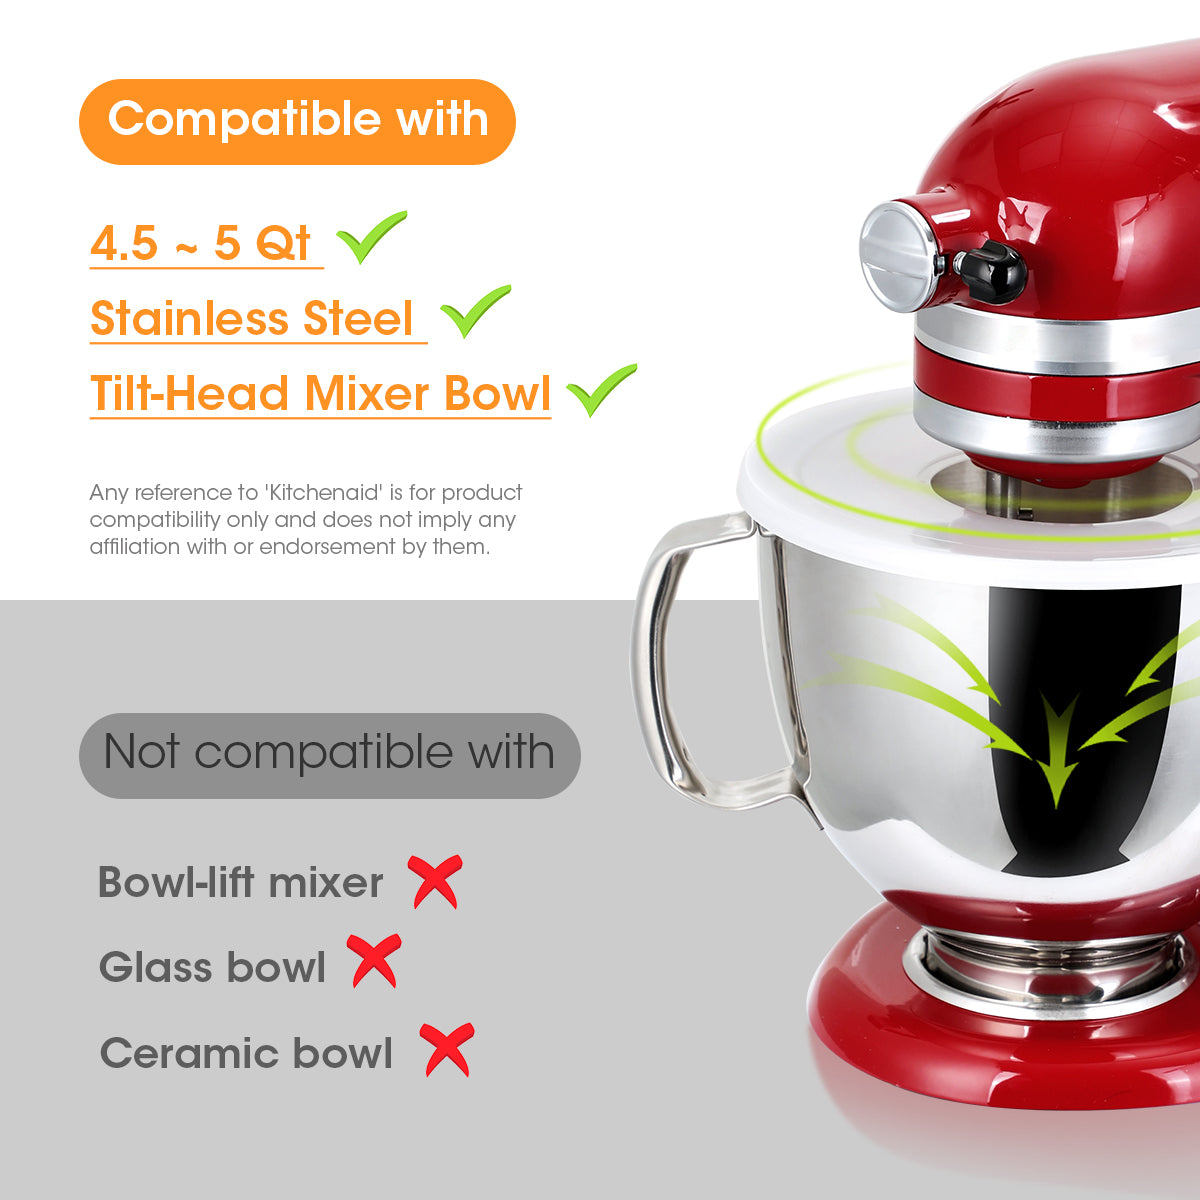 Mixer Bowl Covers Compatible with 4.5 - 5QT Stainless Steel Tilt- Head Mixer Bowl.